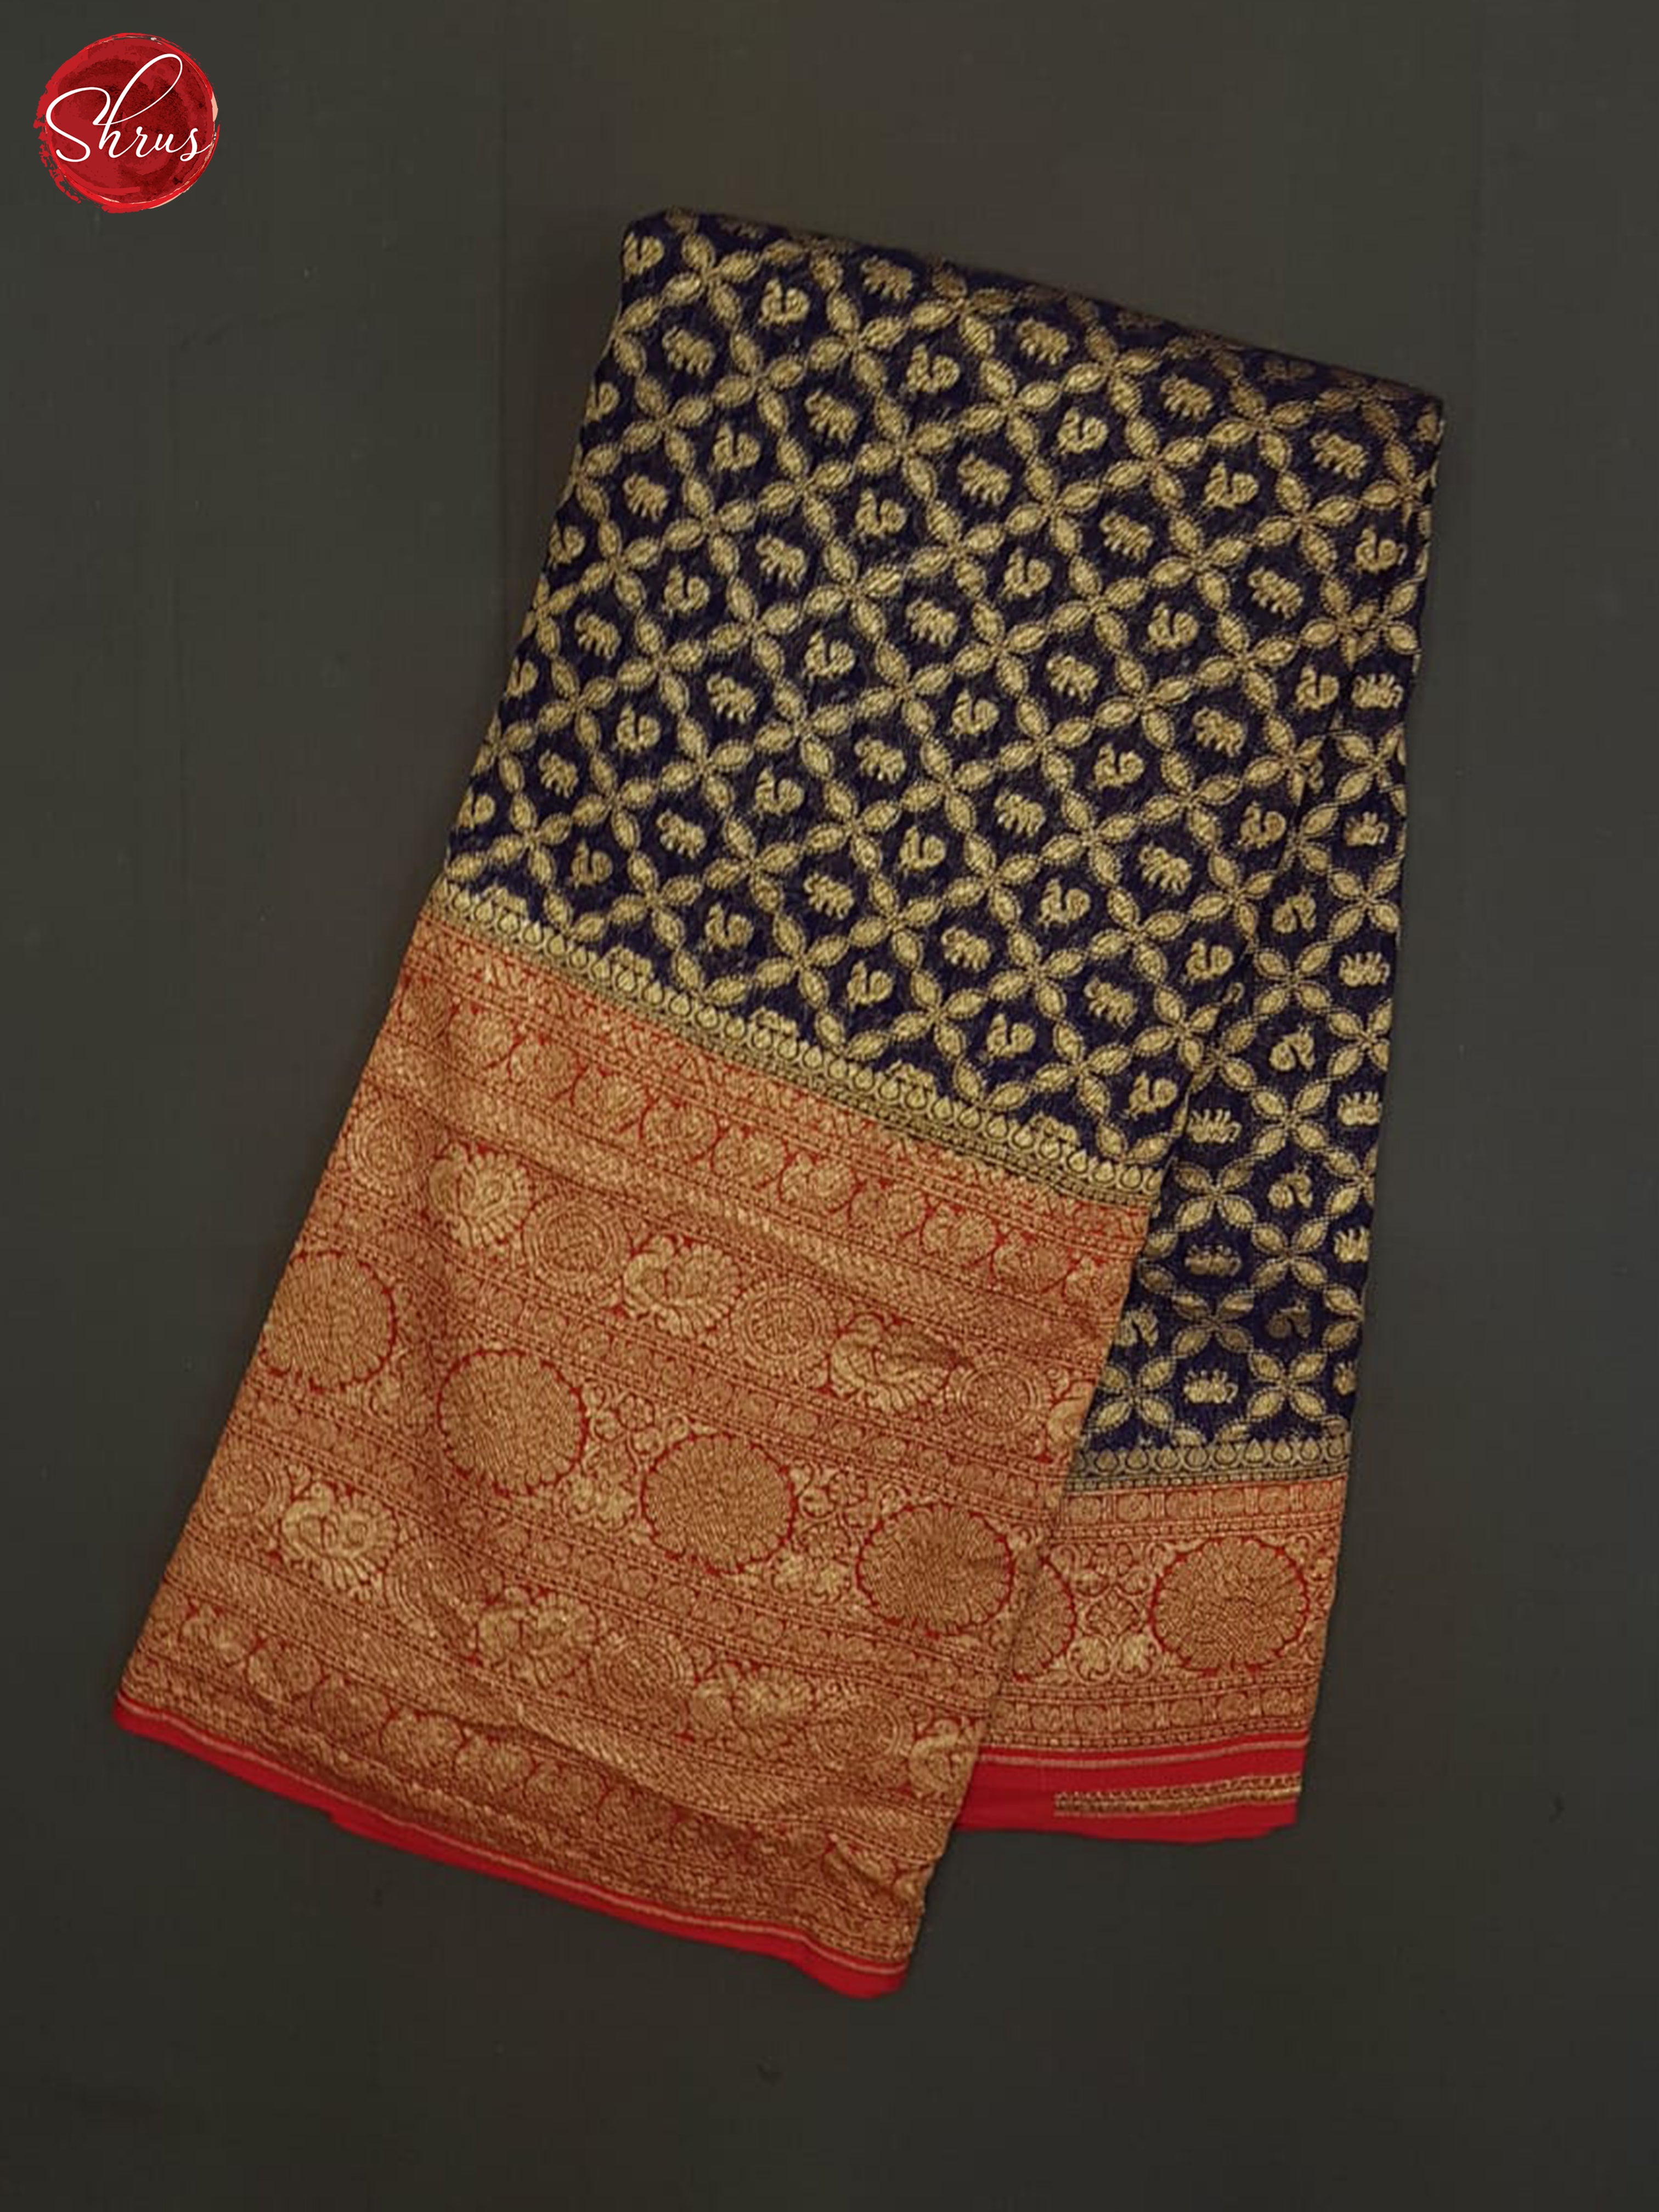 Blue And Red-Georgette Silk Saree - Shop on ShrusEternity.com